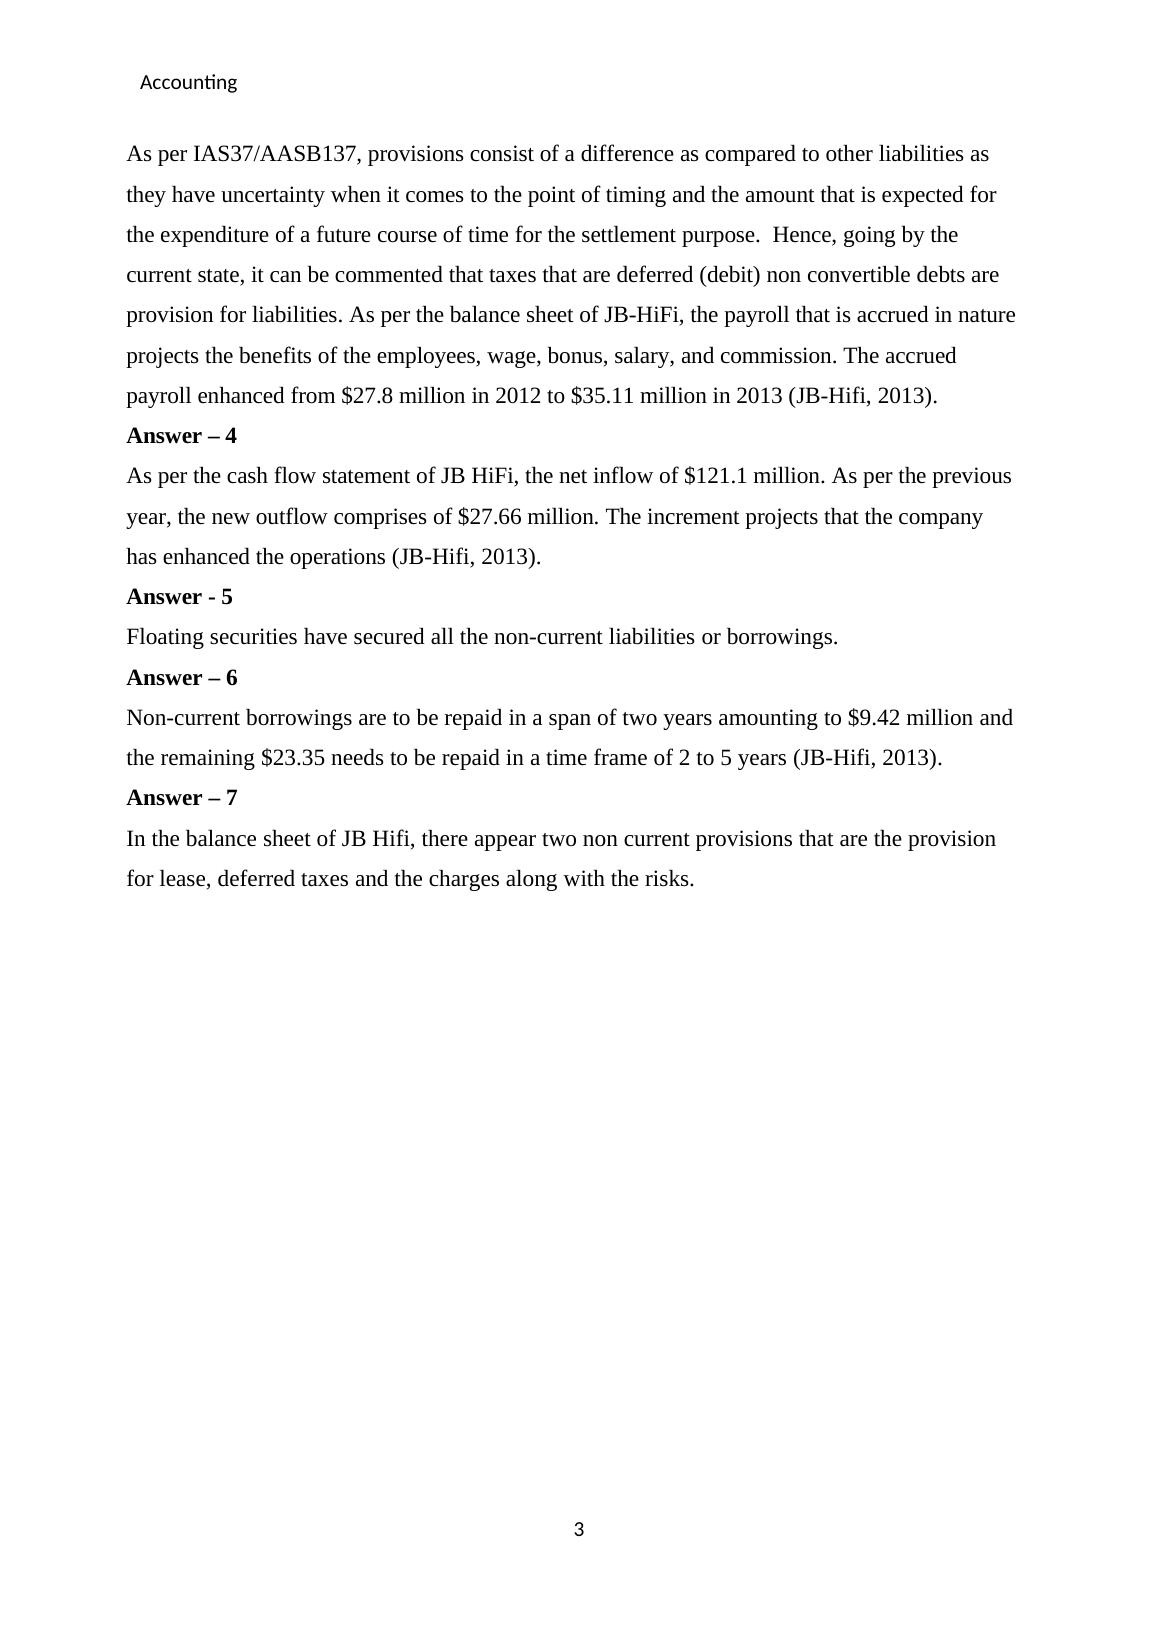 The Overall Current Liabilities of JB Hi Fi Limited | Annual Report_3